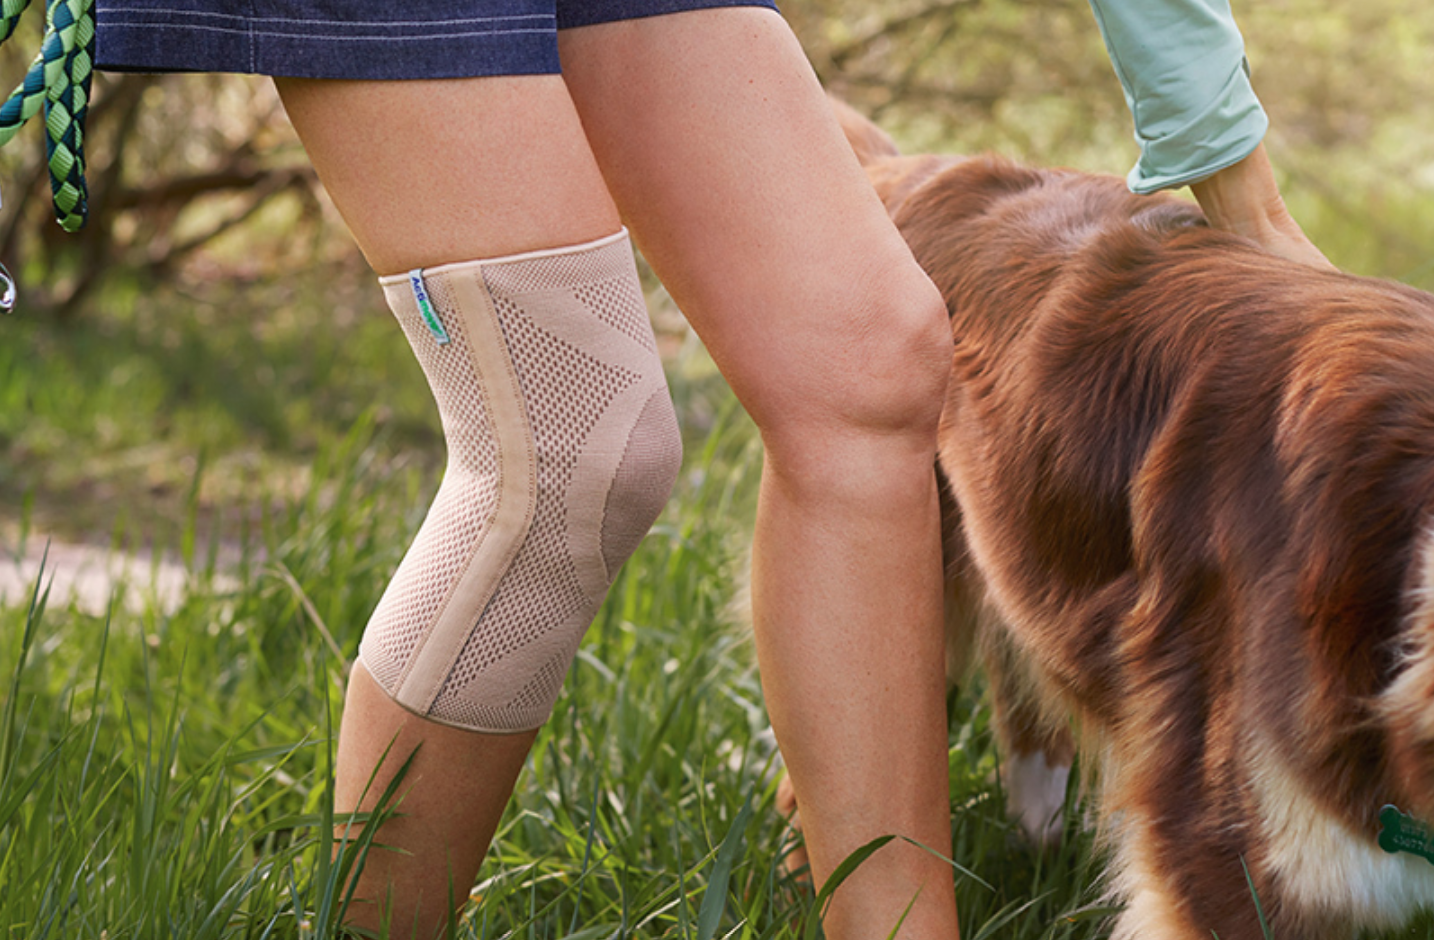 Stays of the Actimove Everyday Knee Support for Stability